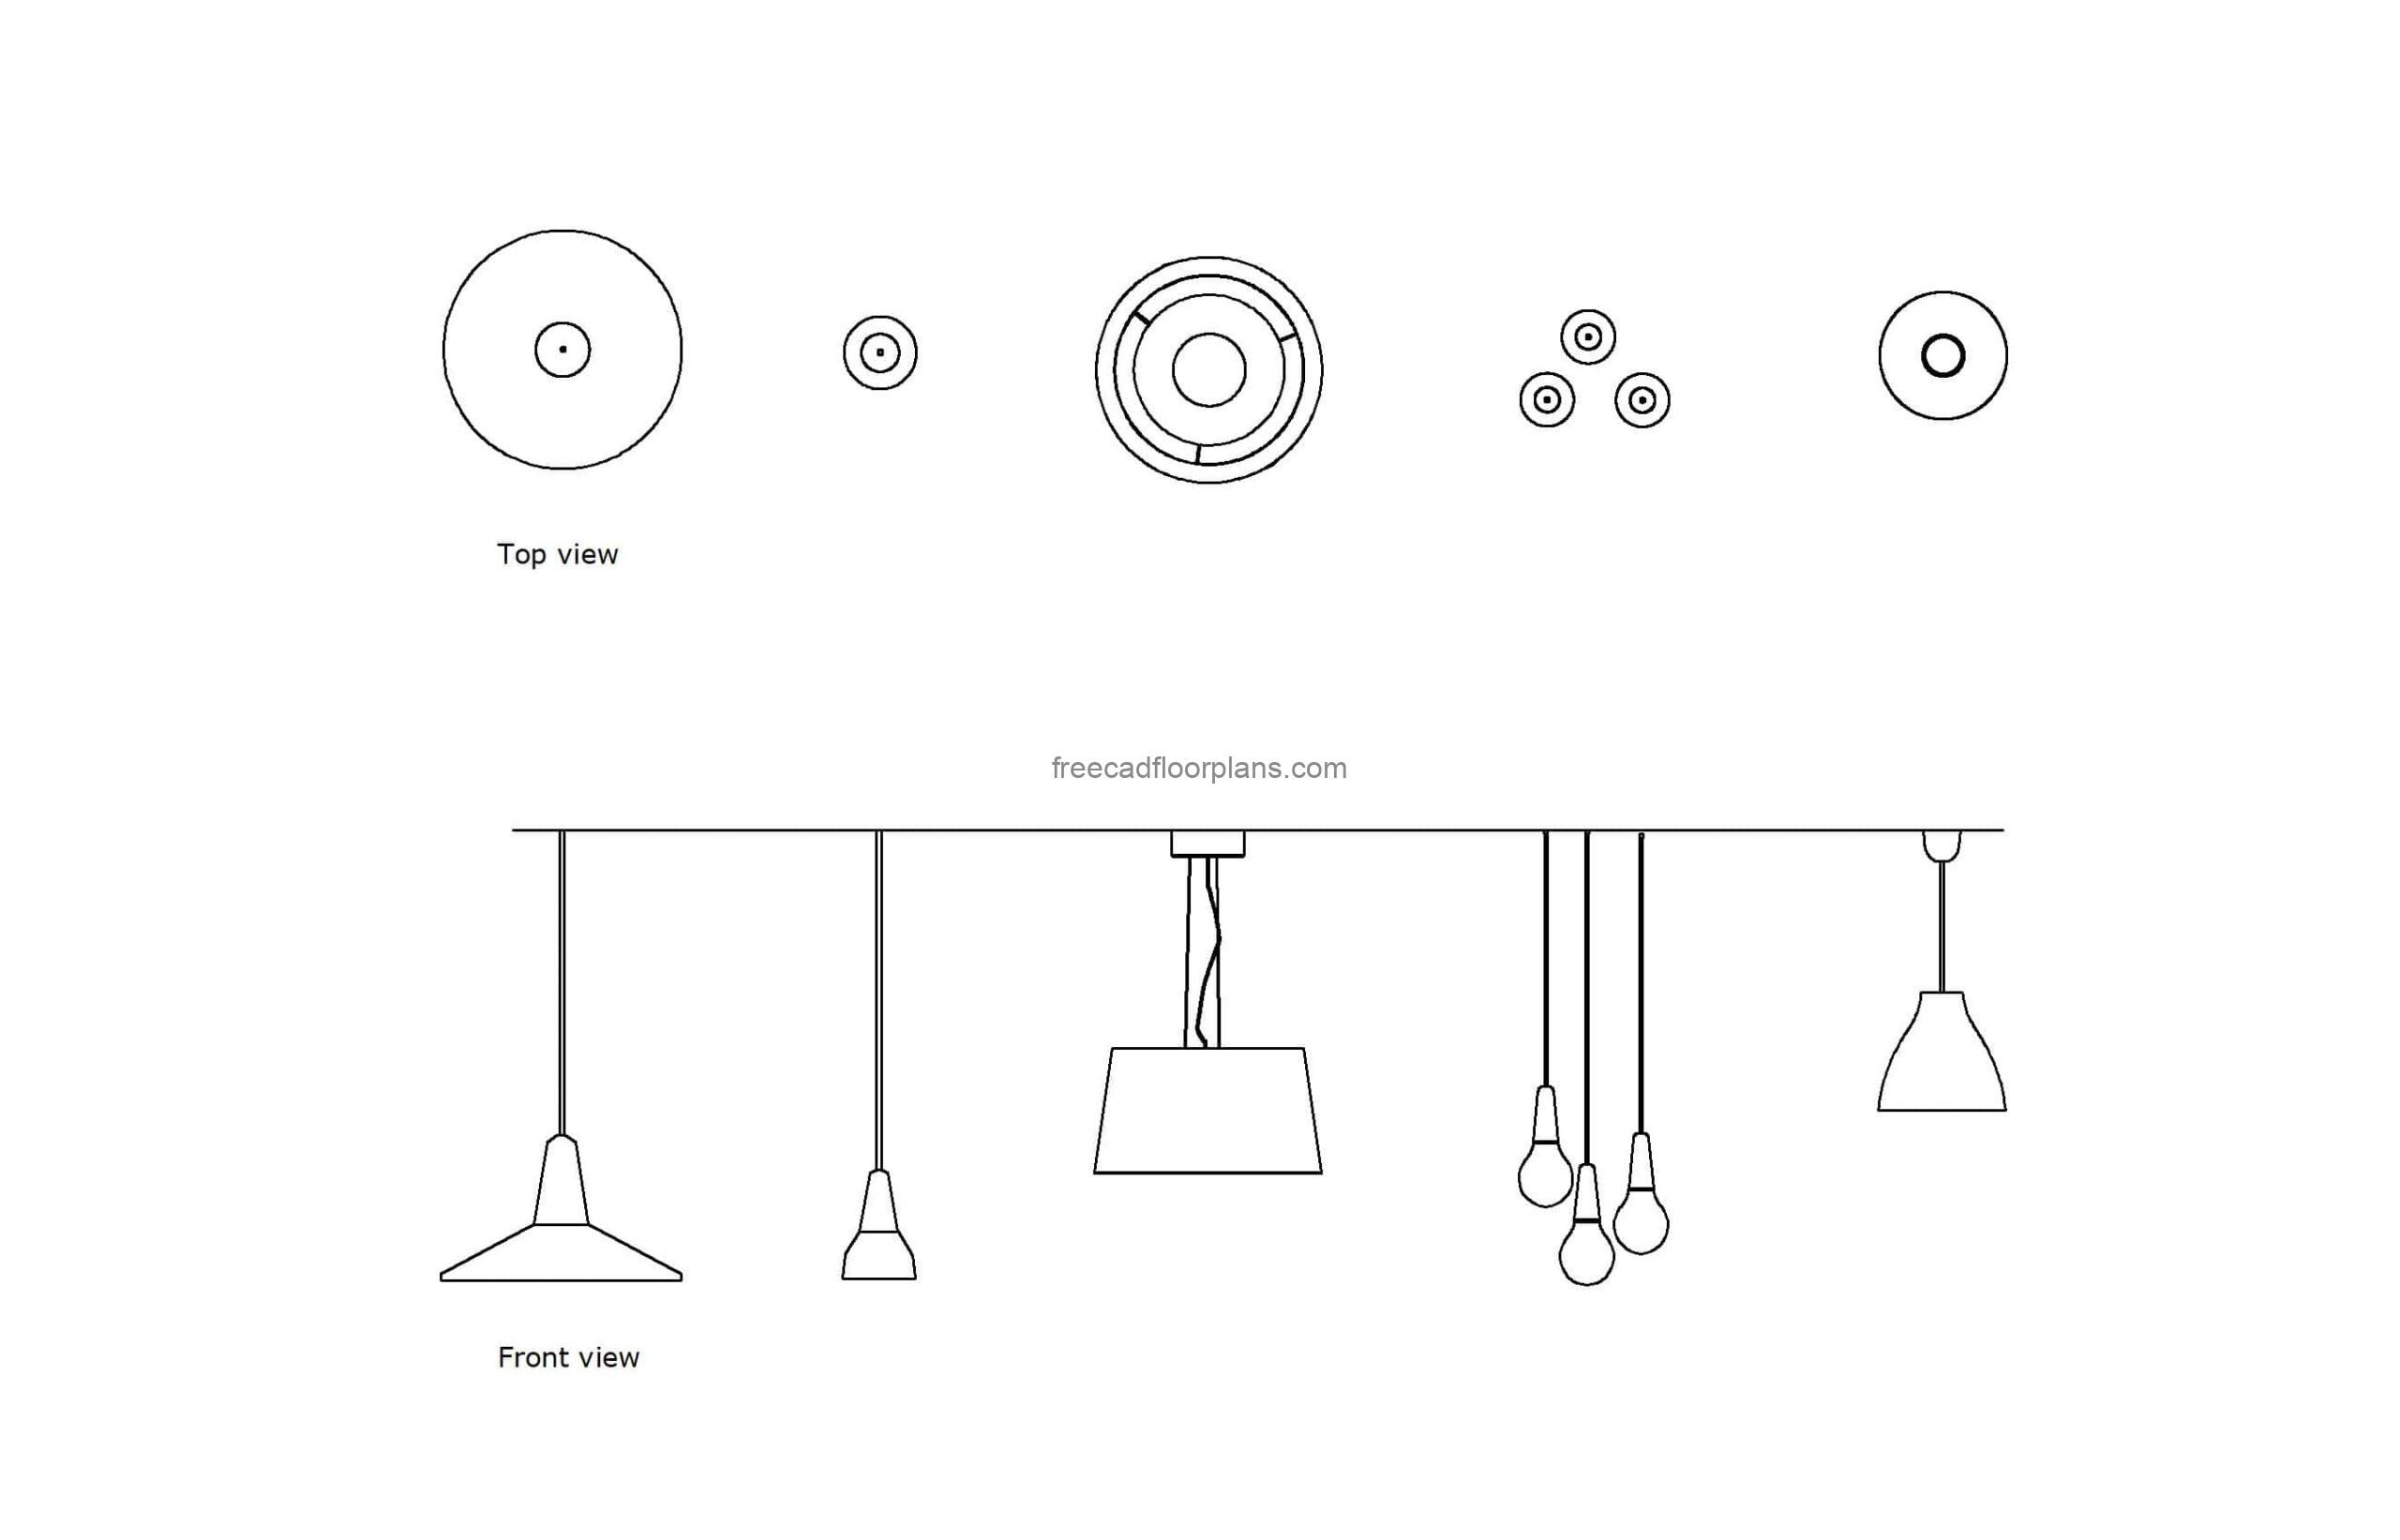 autocad drawing of different pendant lights and lamps, 2d plan and elevation views, dwg file free for download